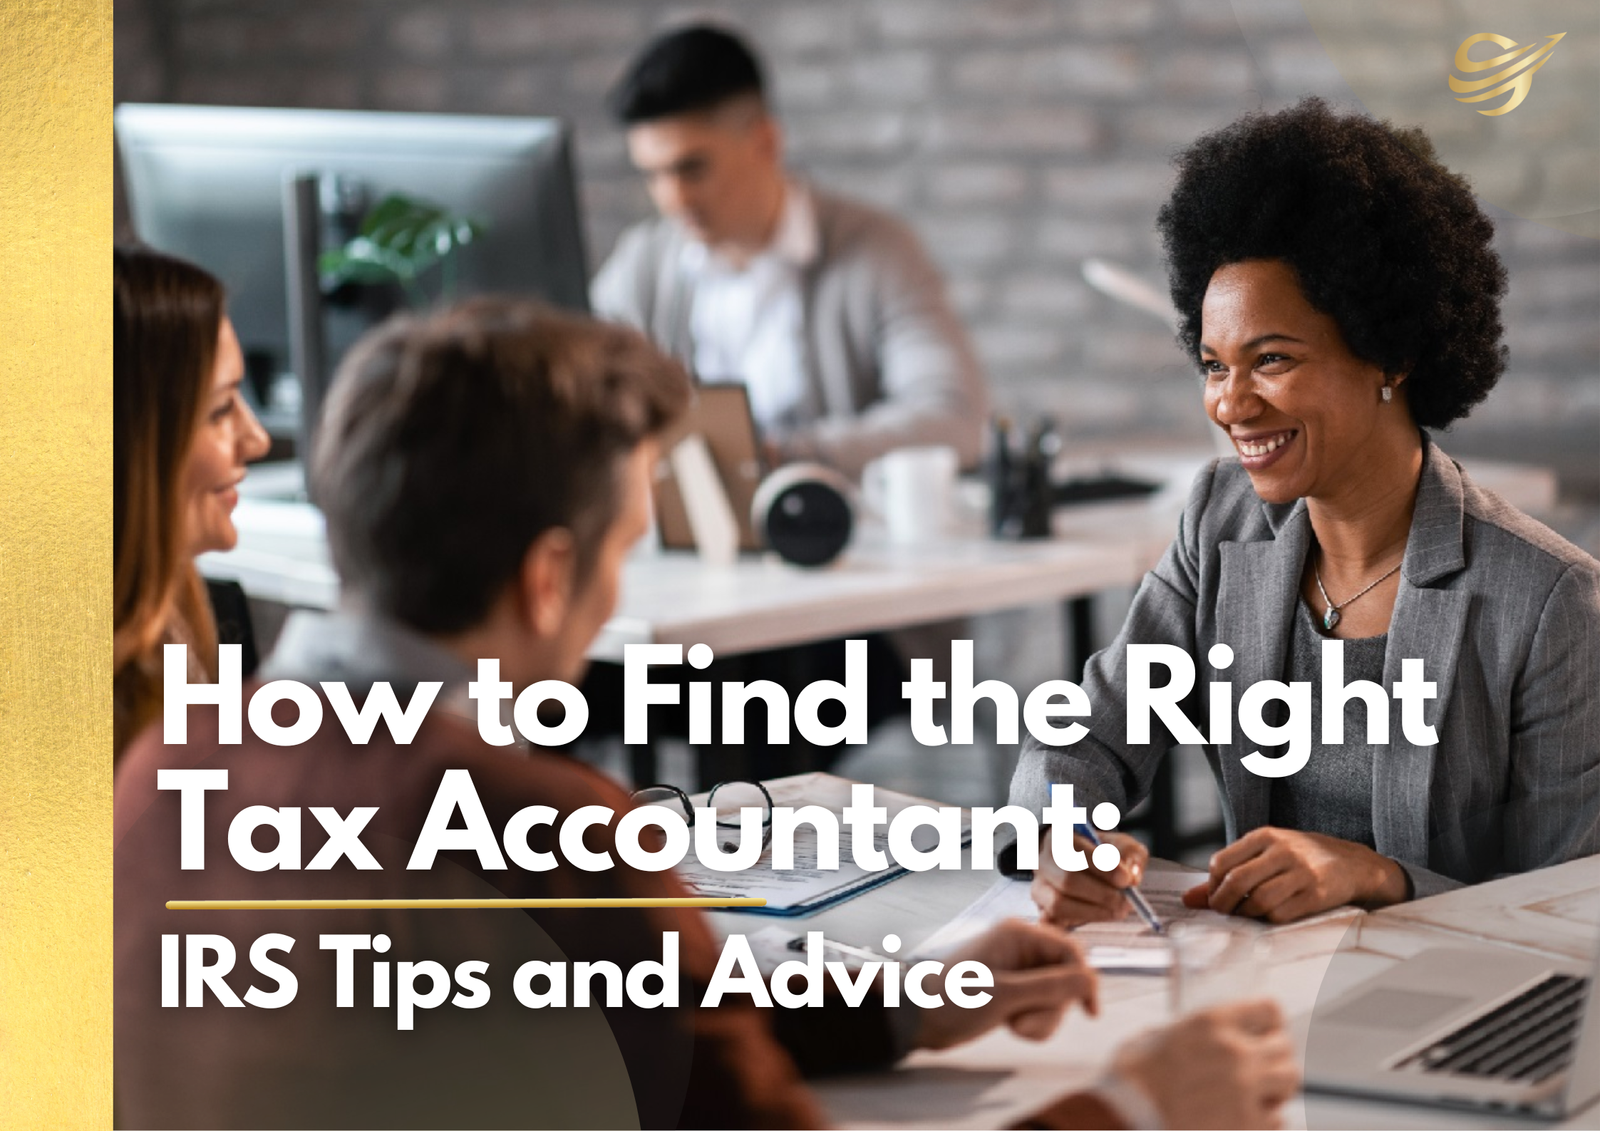 How to Find the Right Tax Accountant: IRS Tips and Advice